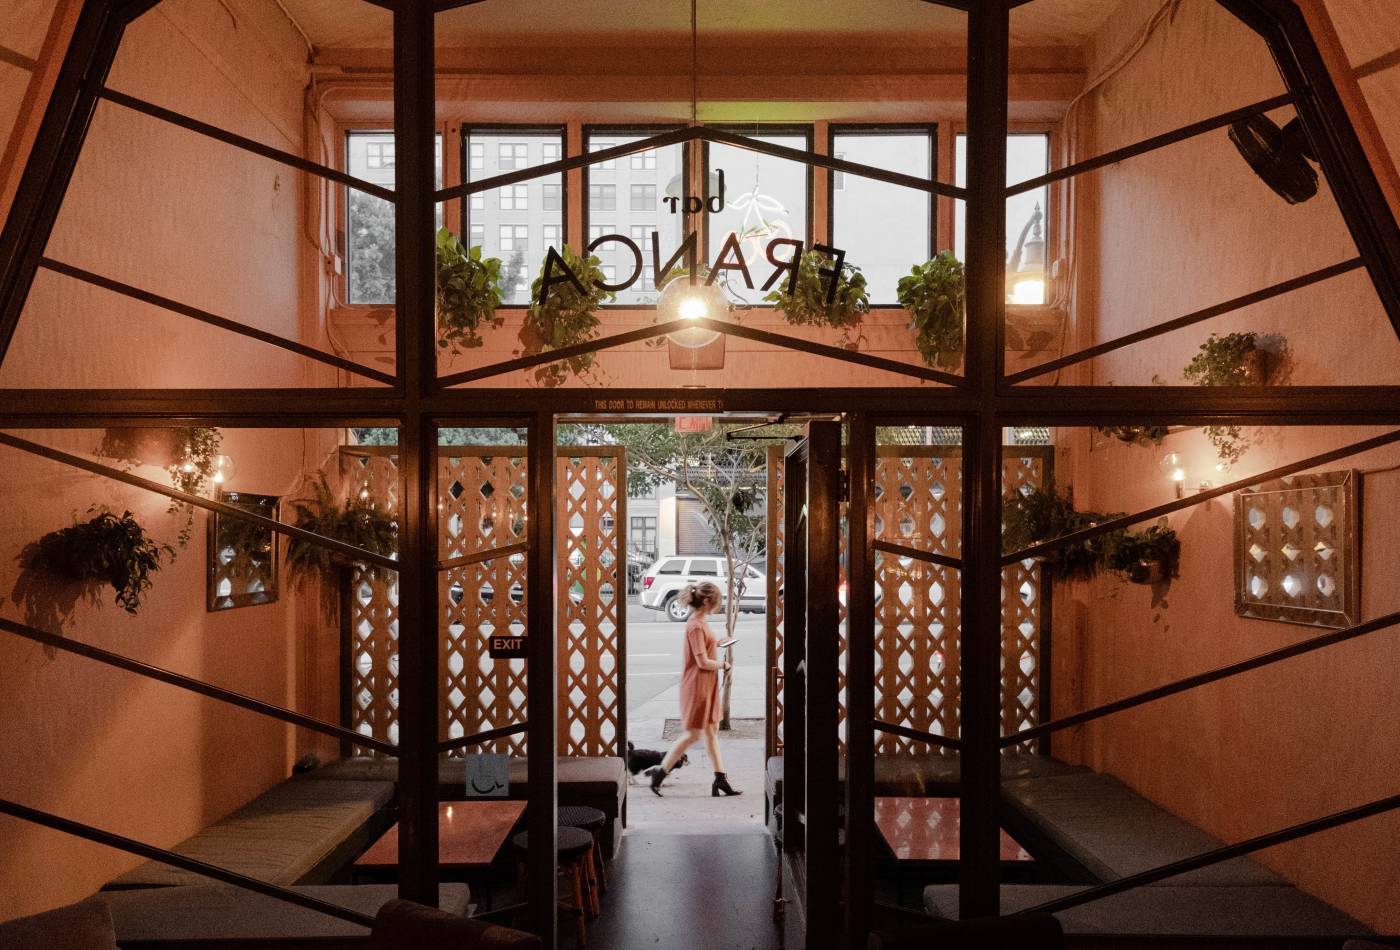 We worked with restaurateur and interior designer Rachel Thomas to create this 2,600 sf cocktail bar in downtown LA. 

Located on an increasingly busy section of Main Street, the unreinforced masonry building was built in 1909 by Parkinson and Bergstrom Architects. The building originally served as the Canadian consulate and the space where the bar is now located once served as a vaudeville theater.

As architects, we executed Thomas' vision for this work, creating the space plan, designing the storefront and managing the permitting process, while Thomas directed the overall vibe, designed the interiors, and selected all of the finishes and furniture.